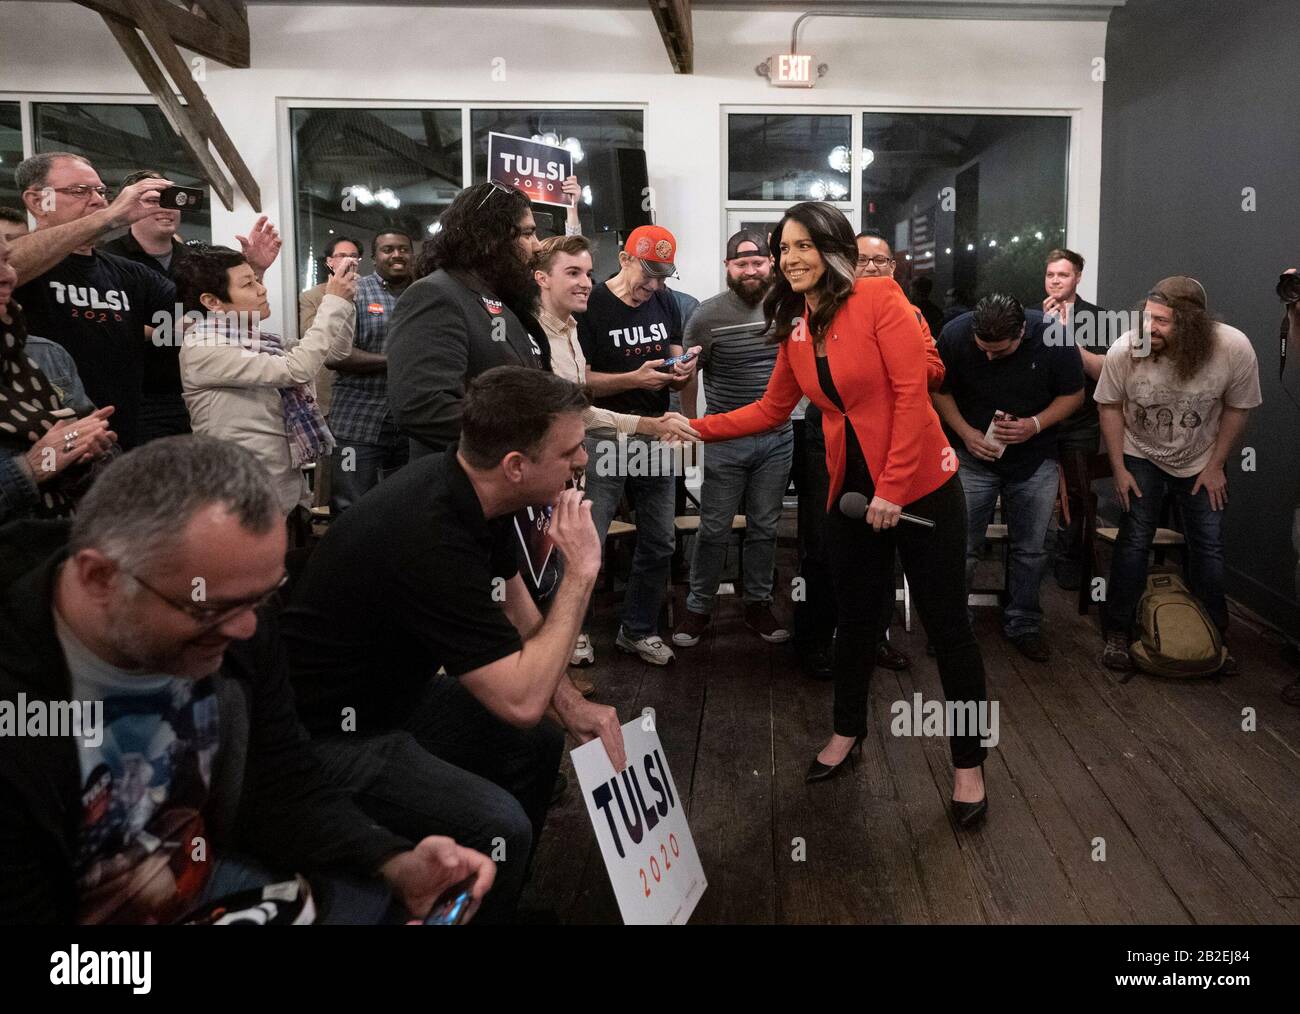 Democratic long shot presidential candidate Tulsi Gabbard campaigns on the eve of Super Tuesday with a speech in Austin to 250 supporters. Stock Photo